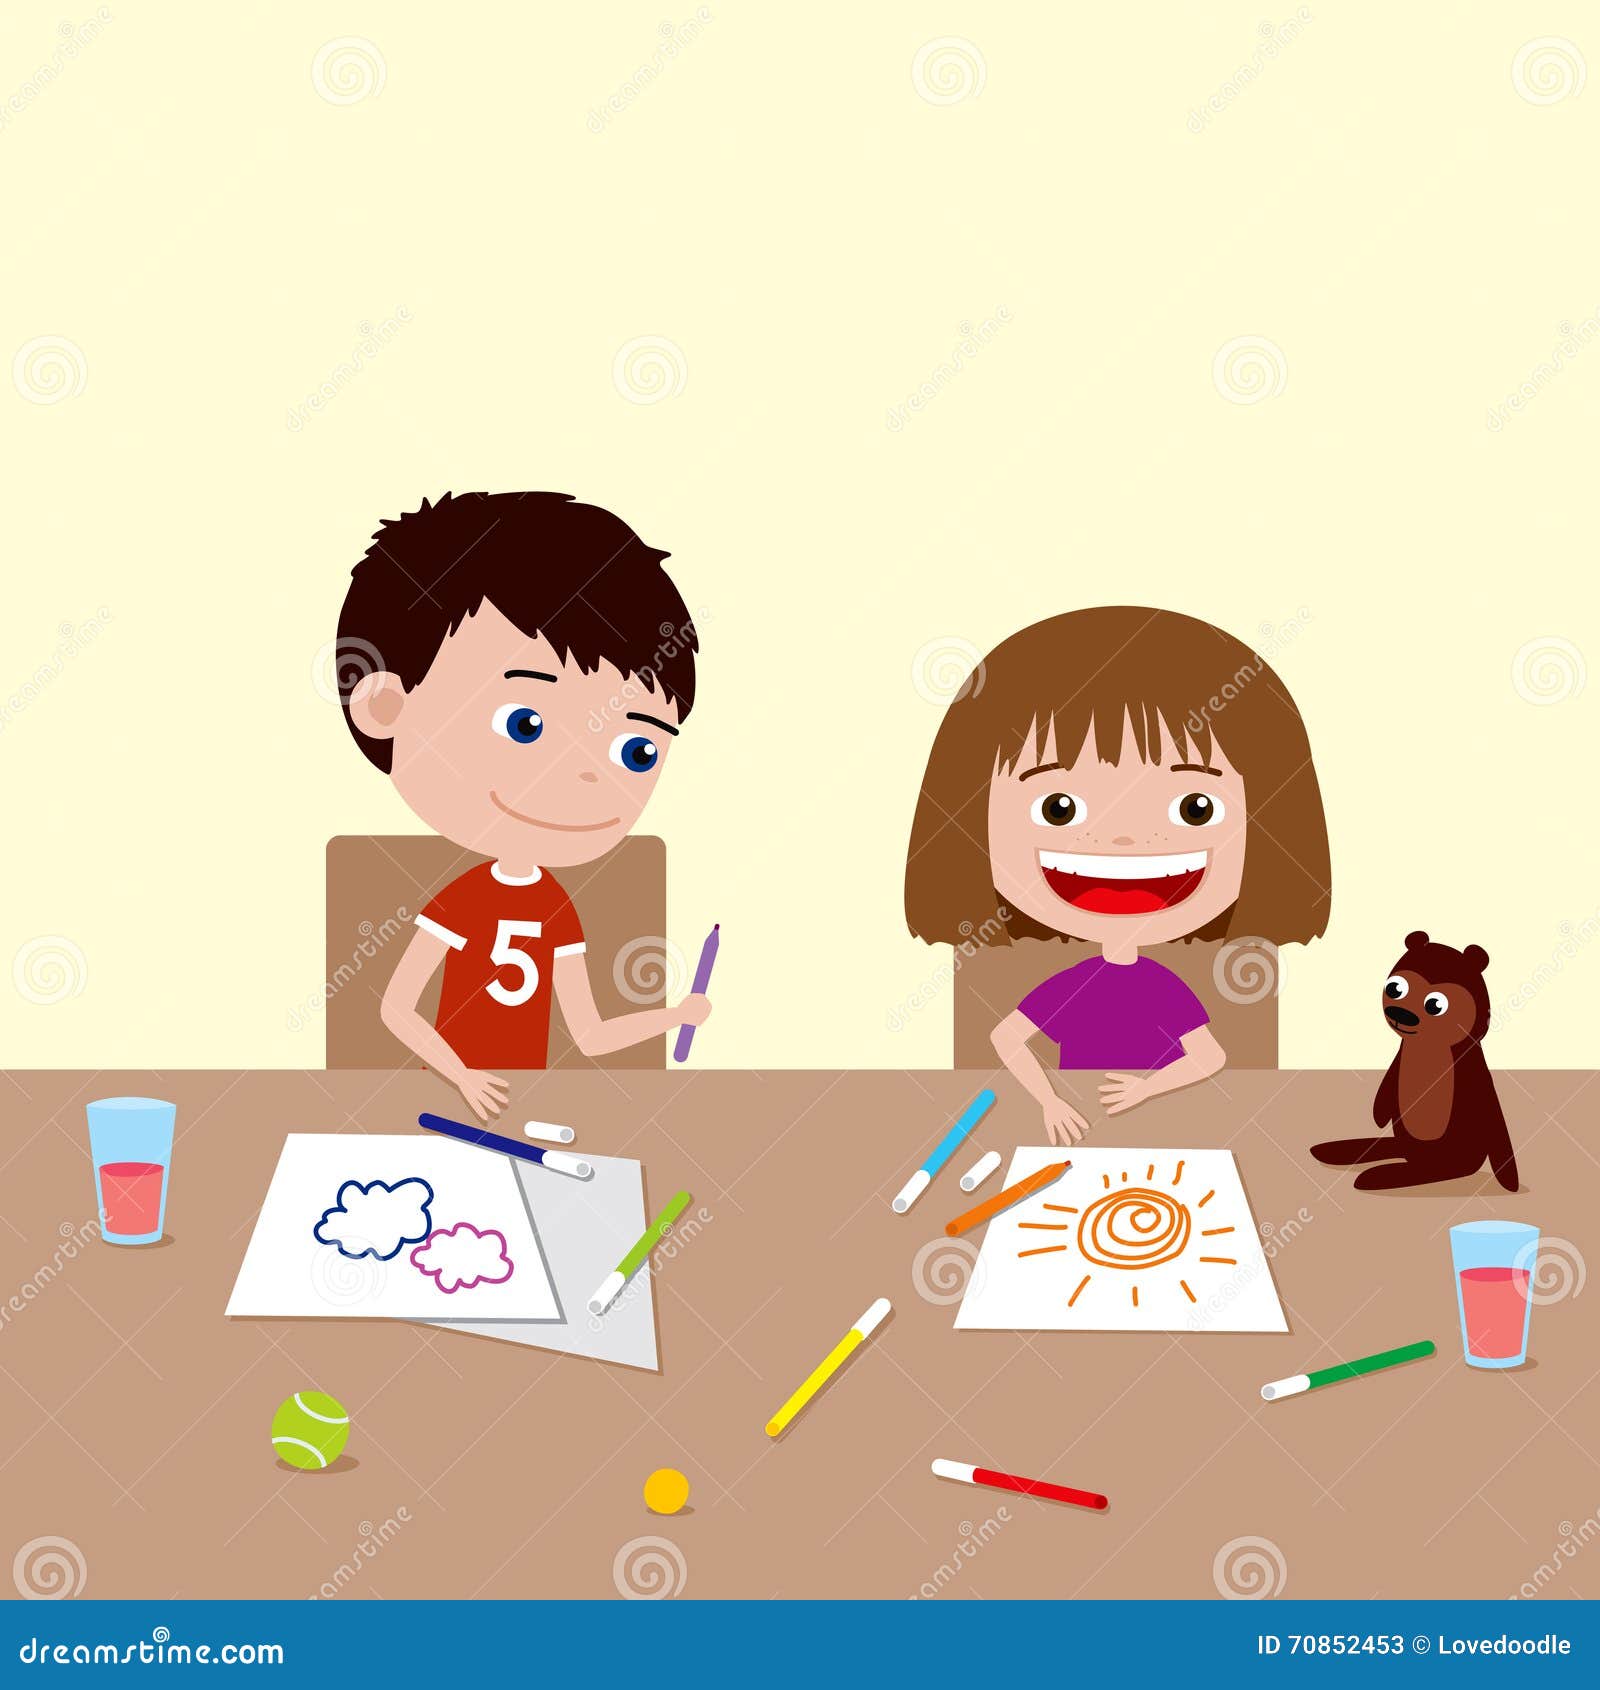 Brother and sister drawing | Stock image | Colourbox-saigonsouth.com.vn